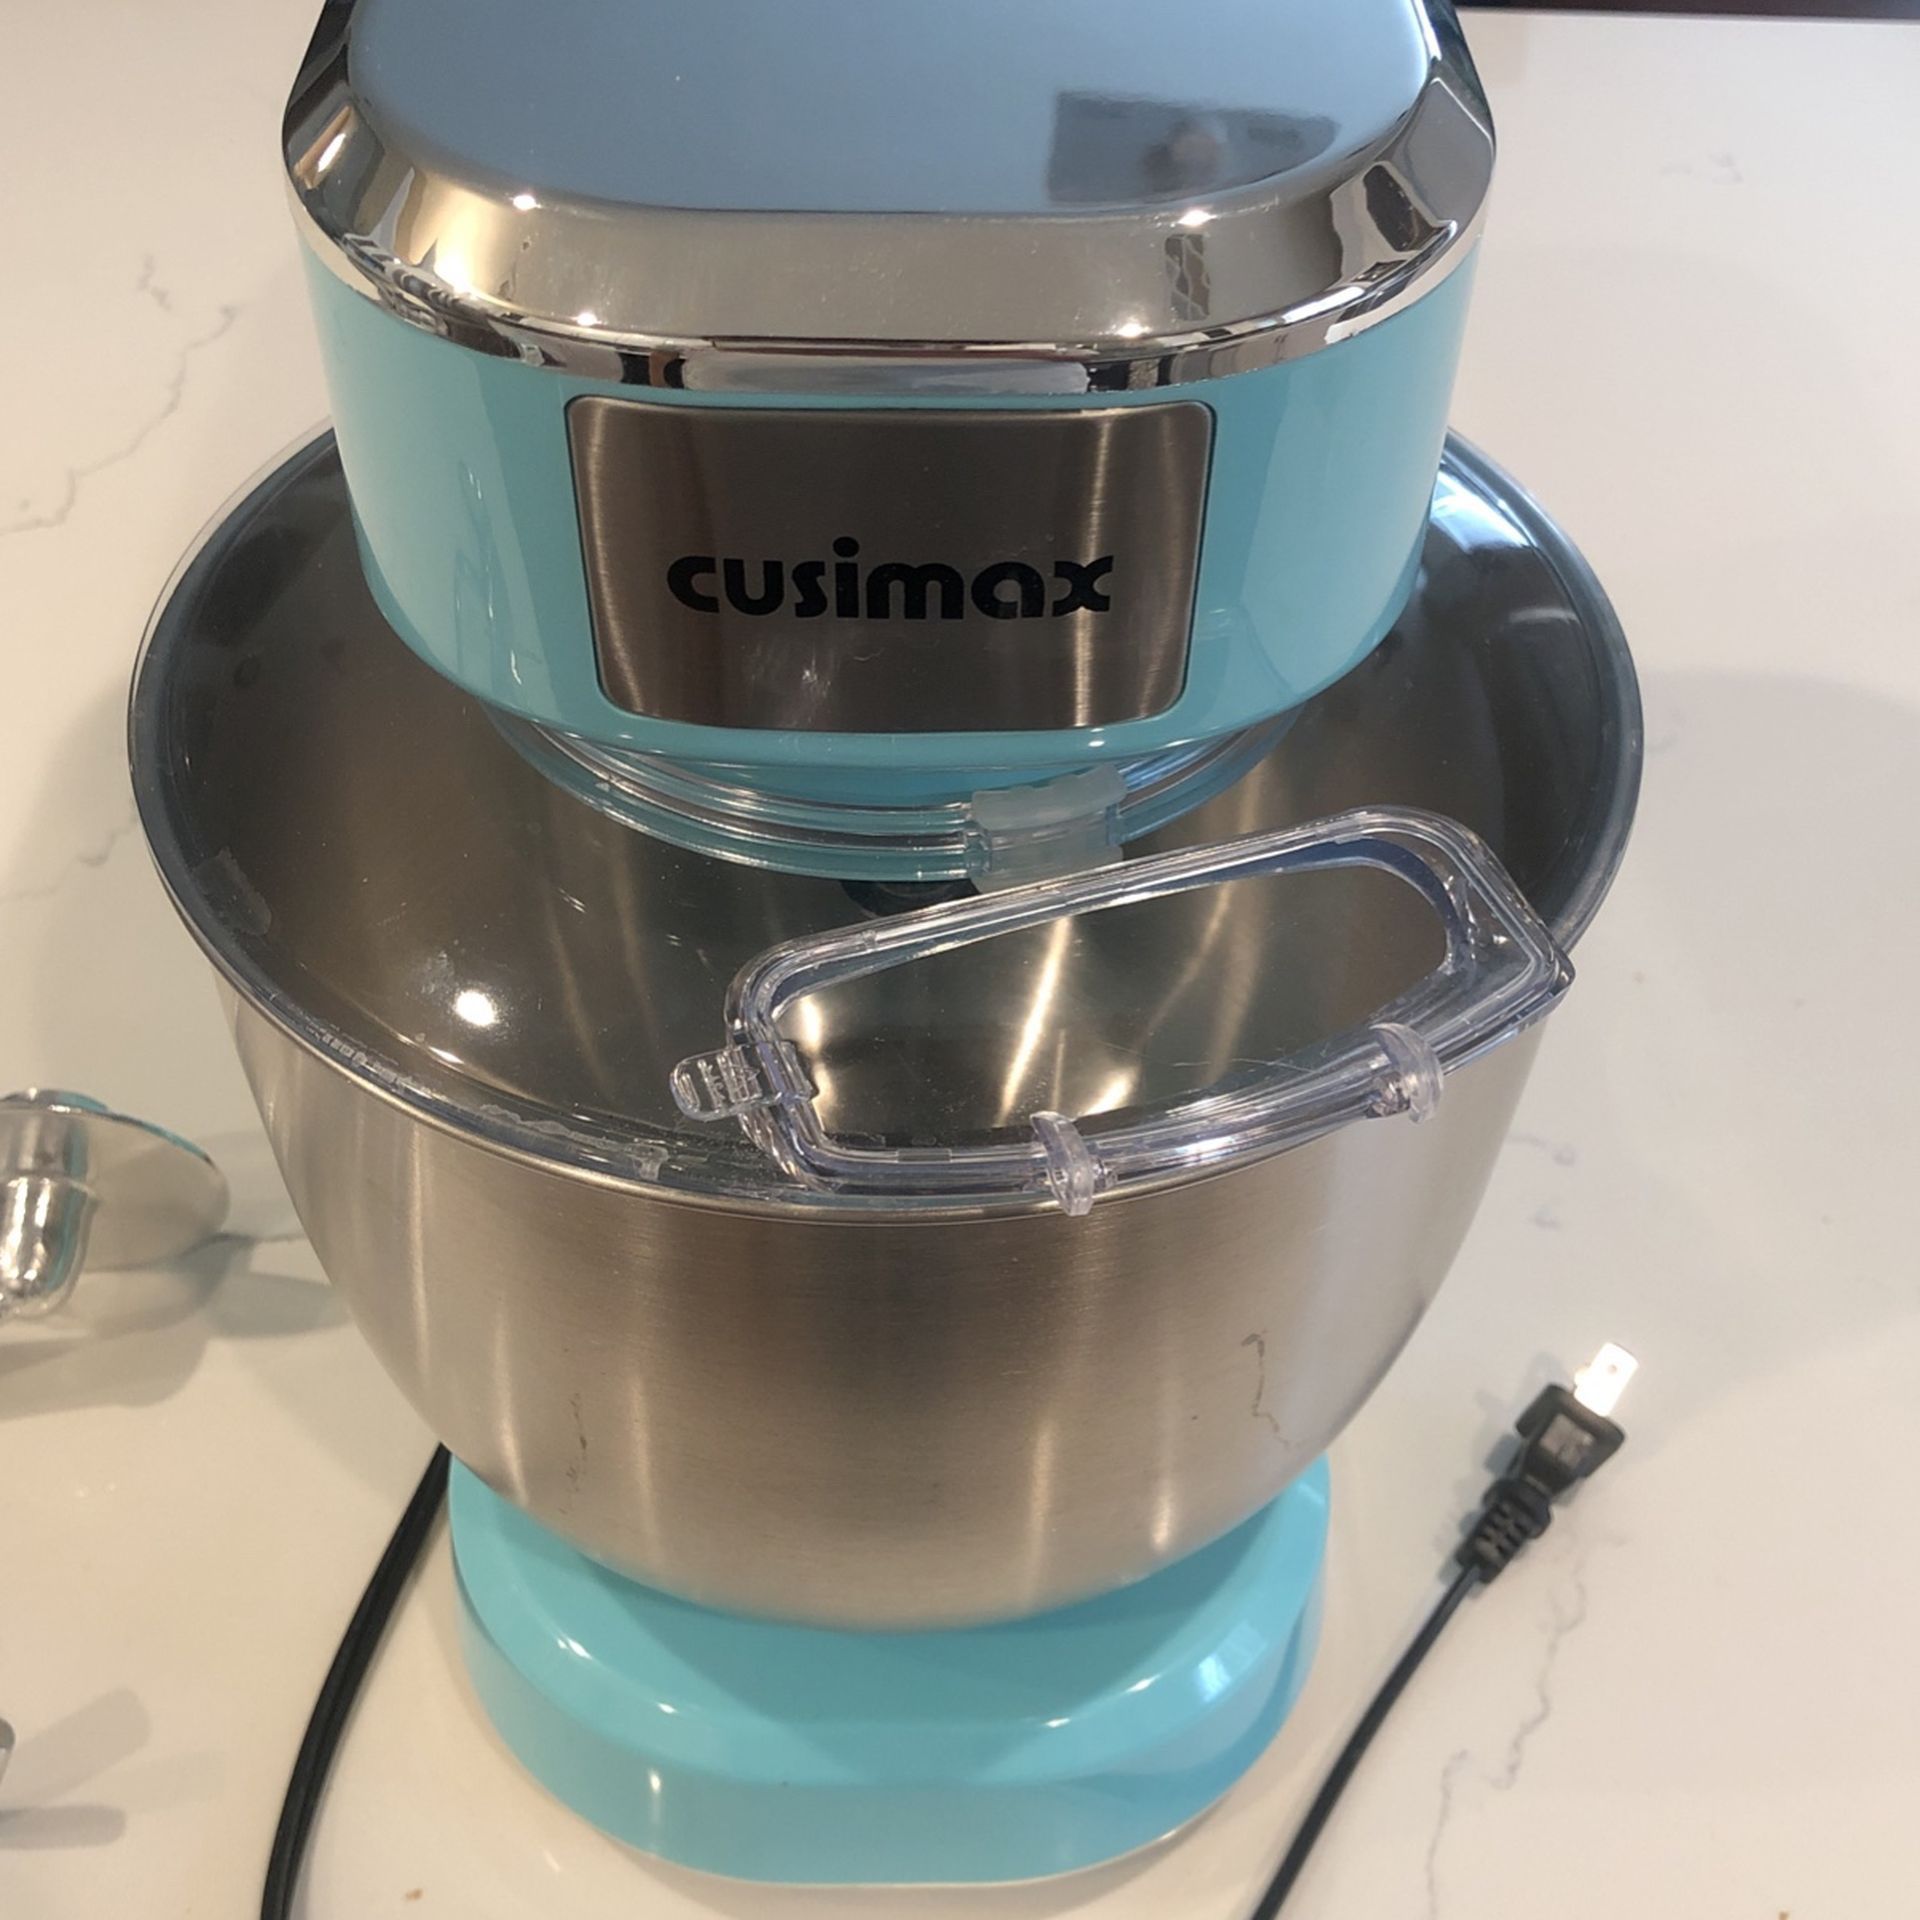 Stand MiCUSIMAX Dough Mixer Tilt-Head Electric Mixer with 5-Quart Stainless Steel Bowl, Dough Hook, Mixing Beater and Whisk, Splash Guard, Blue F